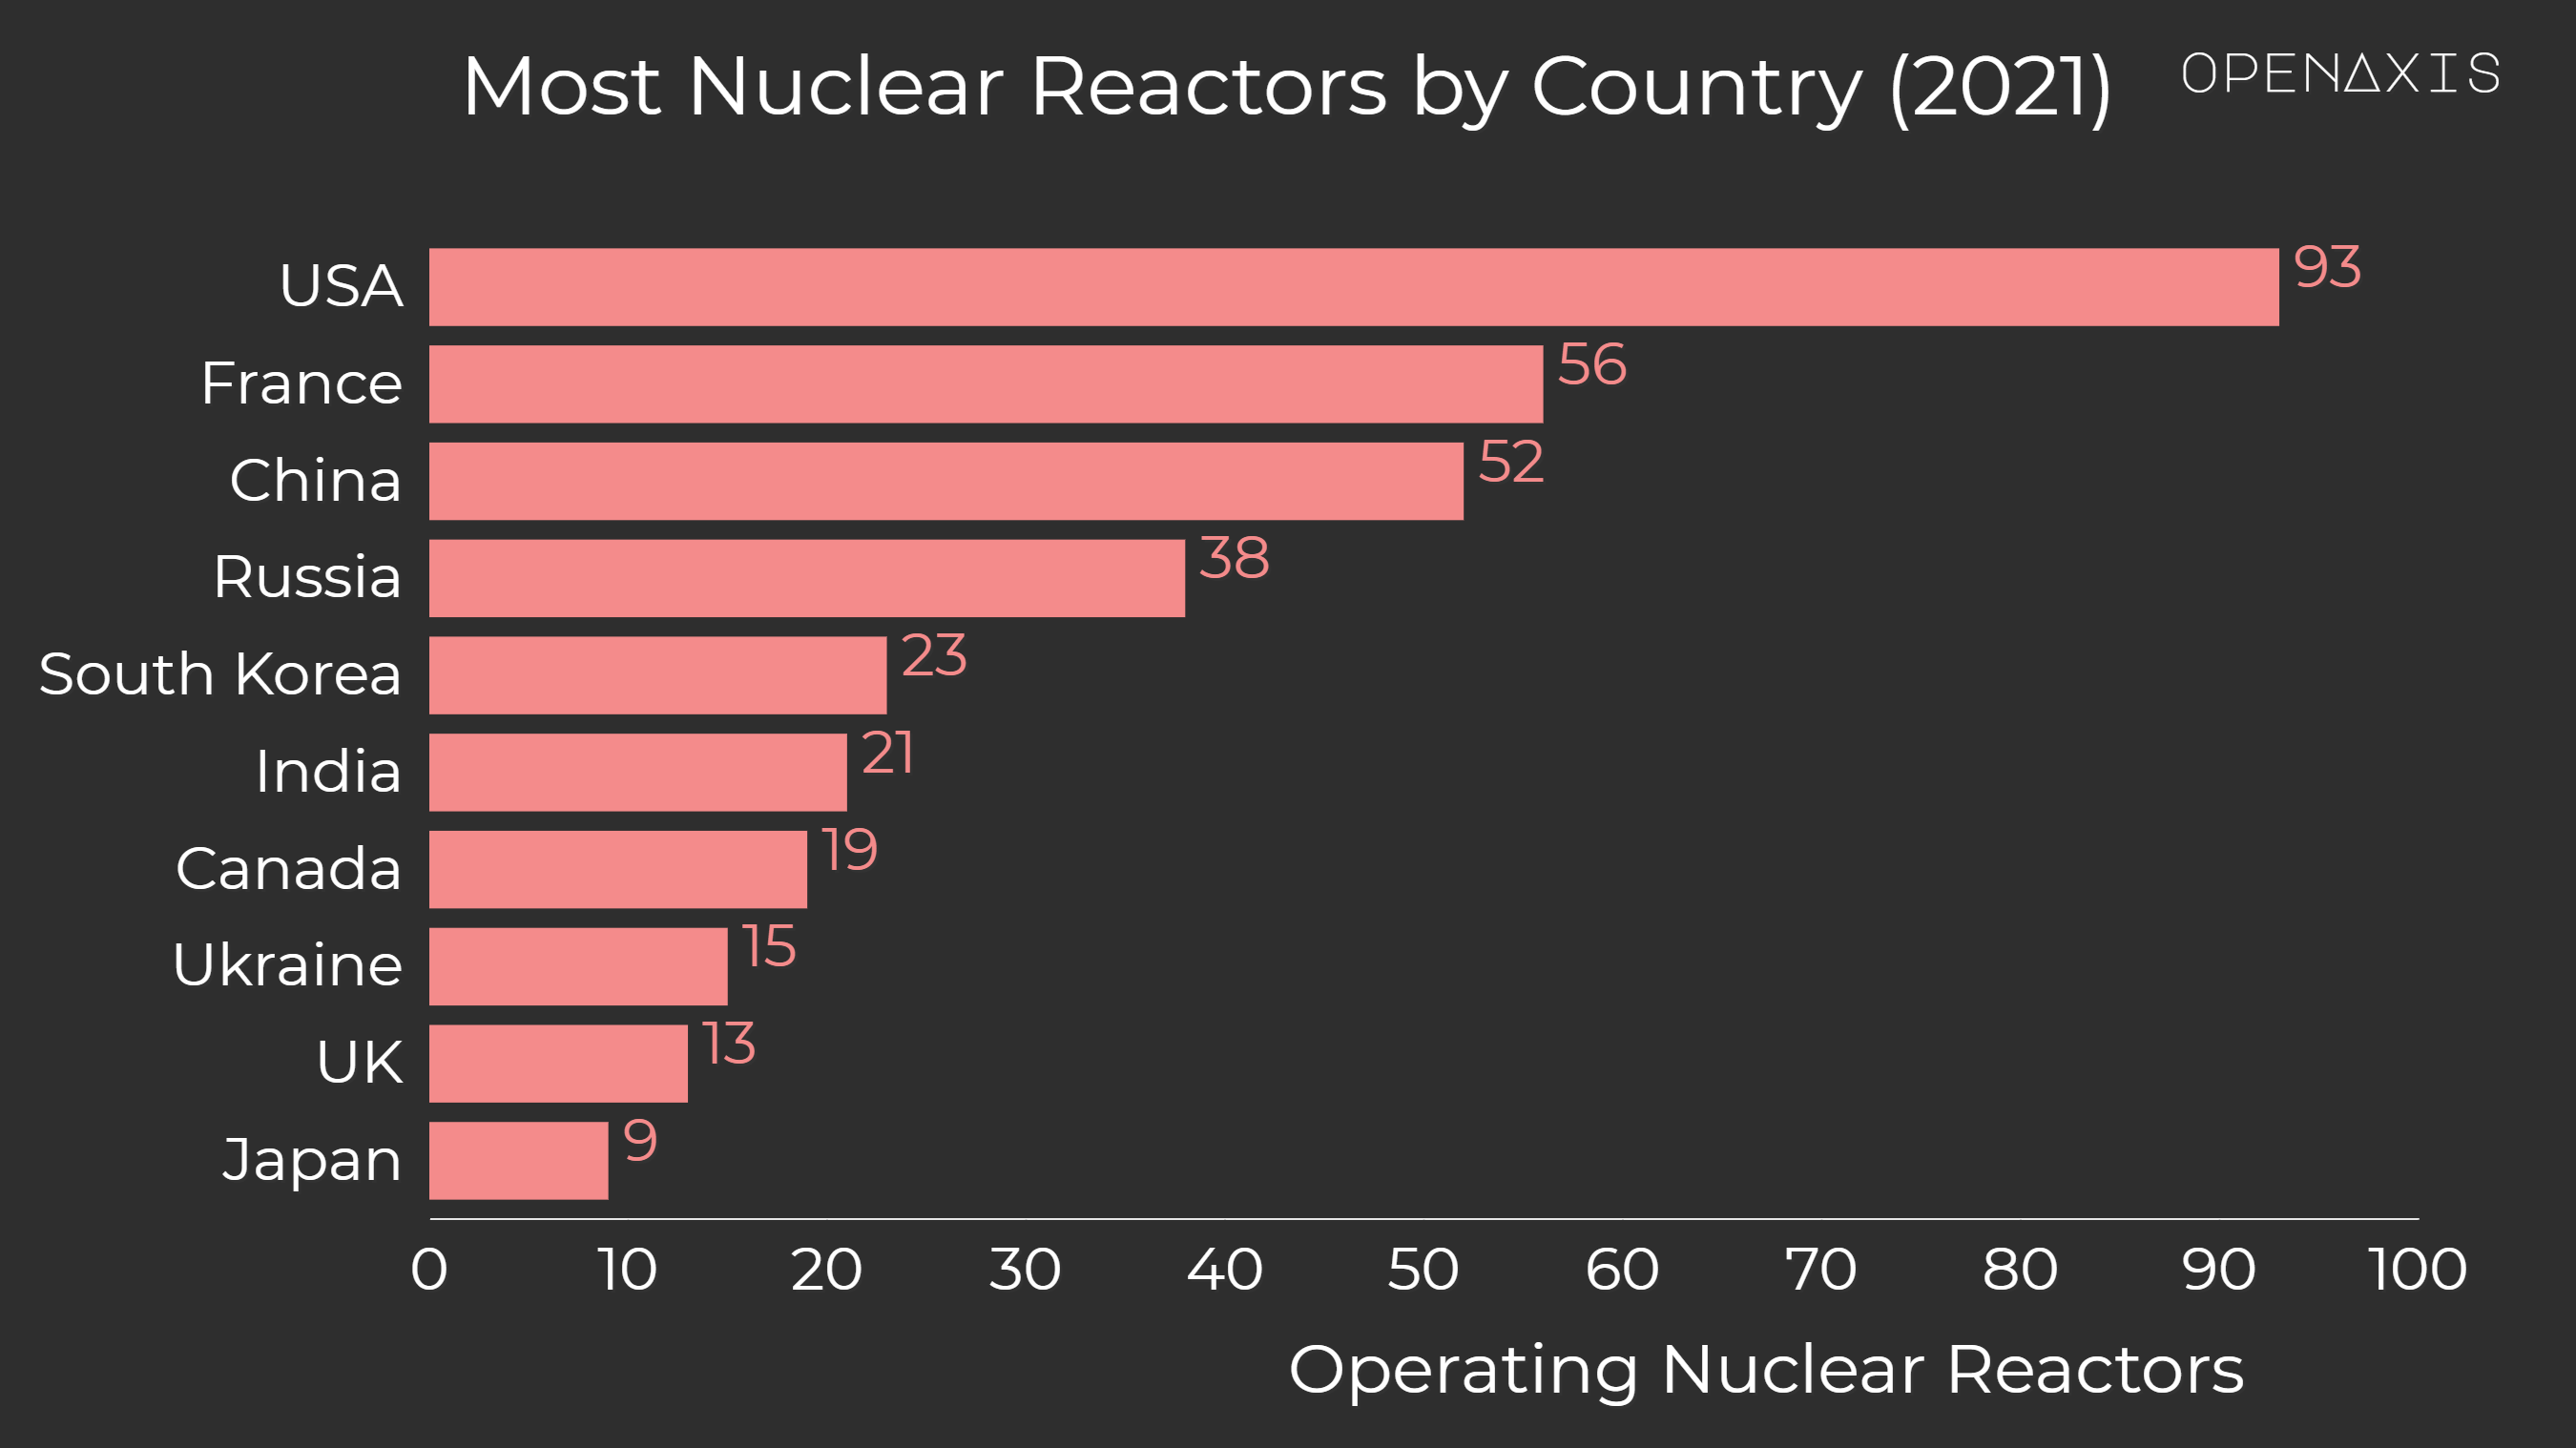 <p>The United States has the most nuclear reactors in the world with 93 and the most capacity at 95,523 MW. They are on the older side, however, as the mean age of their fleet is 40.6 years. </p><p><br /></p><p>France relies the most on nuclear power for electricity in the country, with reactors accounting for 67% of total output. China has the most reactors currently under construction with 18.</p><p><br /></p><p>Despite having nuclear reactors, only 7 out of the 33 countries also have nuclear weapons. In fact, two countries, North Korea and Israel, have nuclear warheads but no nuclear reactors.</p><p><br /></p><p>﻿<a href="/search?q=%23energy" target="_blank">#energy</a>﻿ ﻿<a href="/search?q=%23electricity" target="_blank">#electricity</a>﻿ ﻿<a href="/search?q=%23nuclear" target="_blank">#nuclear</a>﻿ </p><p><br /></p><p>Source: <a href="/data/3838" target="_blank">The World Nuclear Industry</a></p><p><br /></p>